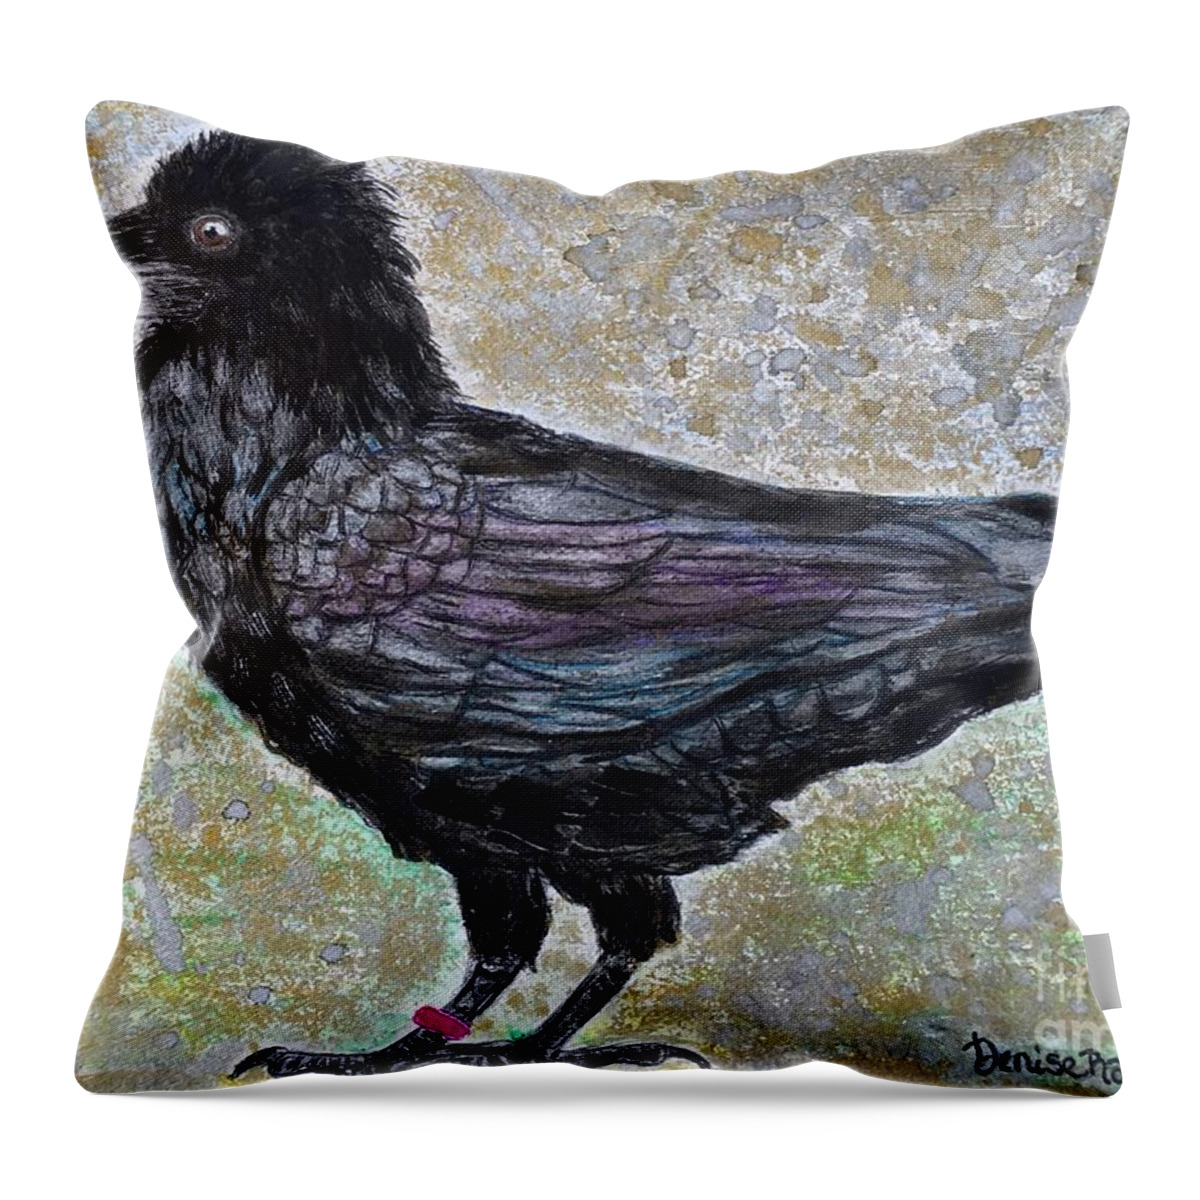 Merlina Throw Pillow featuring the painting Merlina by Denise Railey